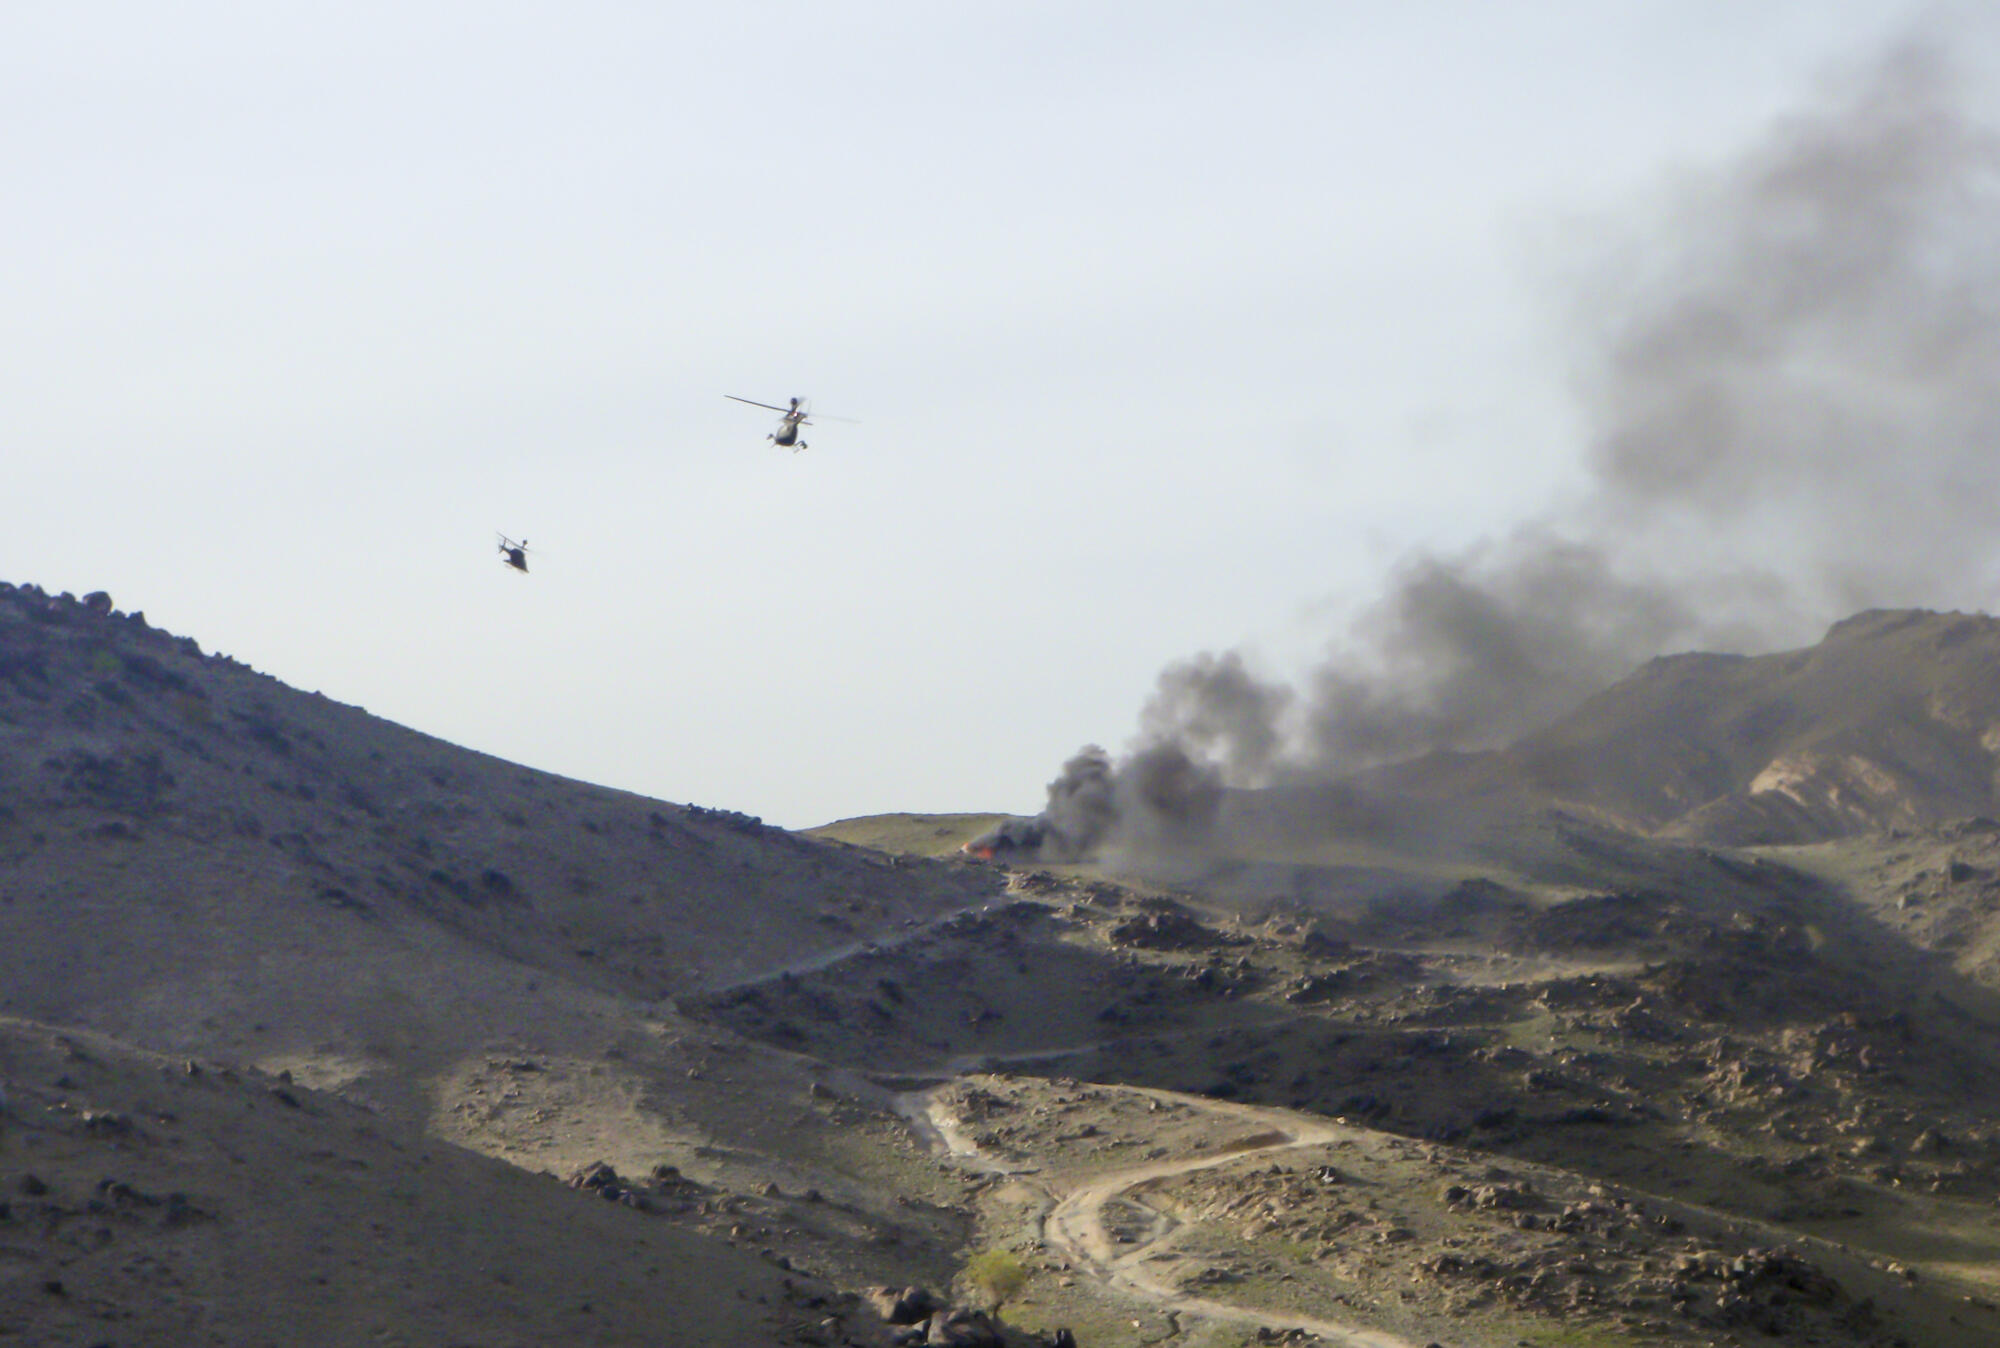 Helicopters flying over a bombing in Afghanistan.